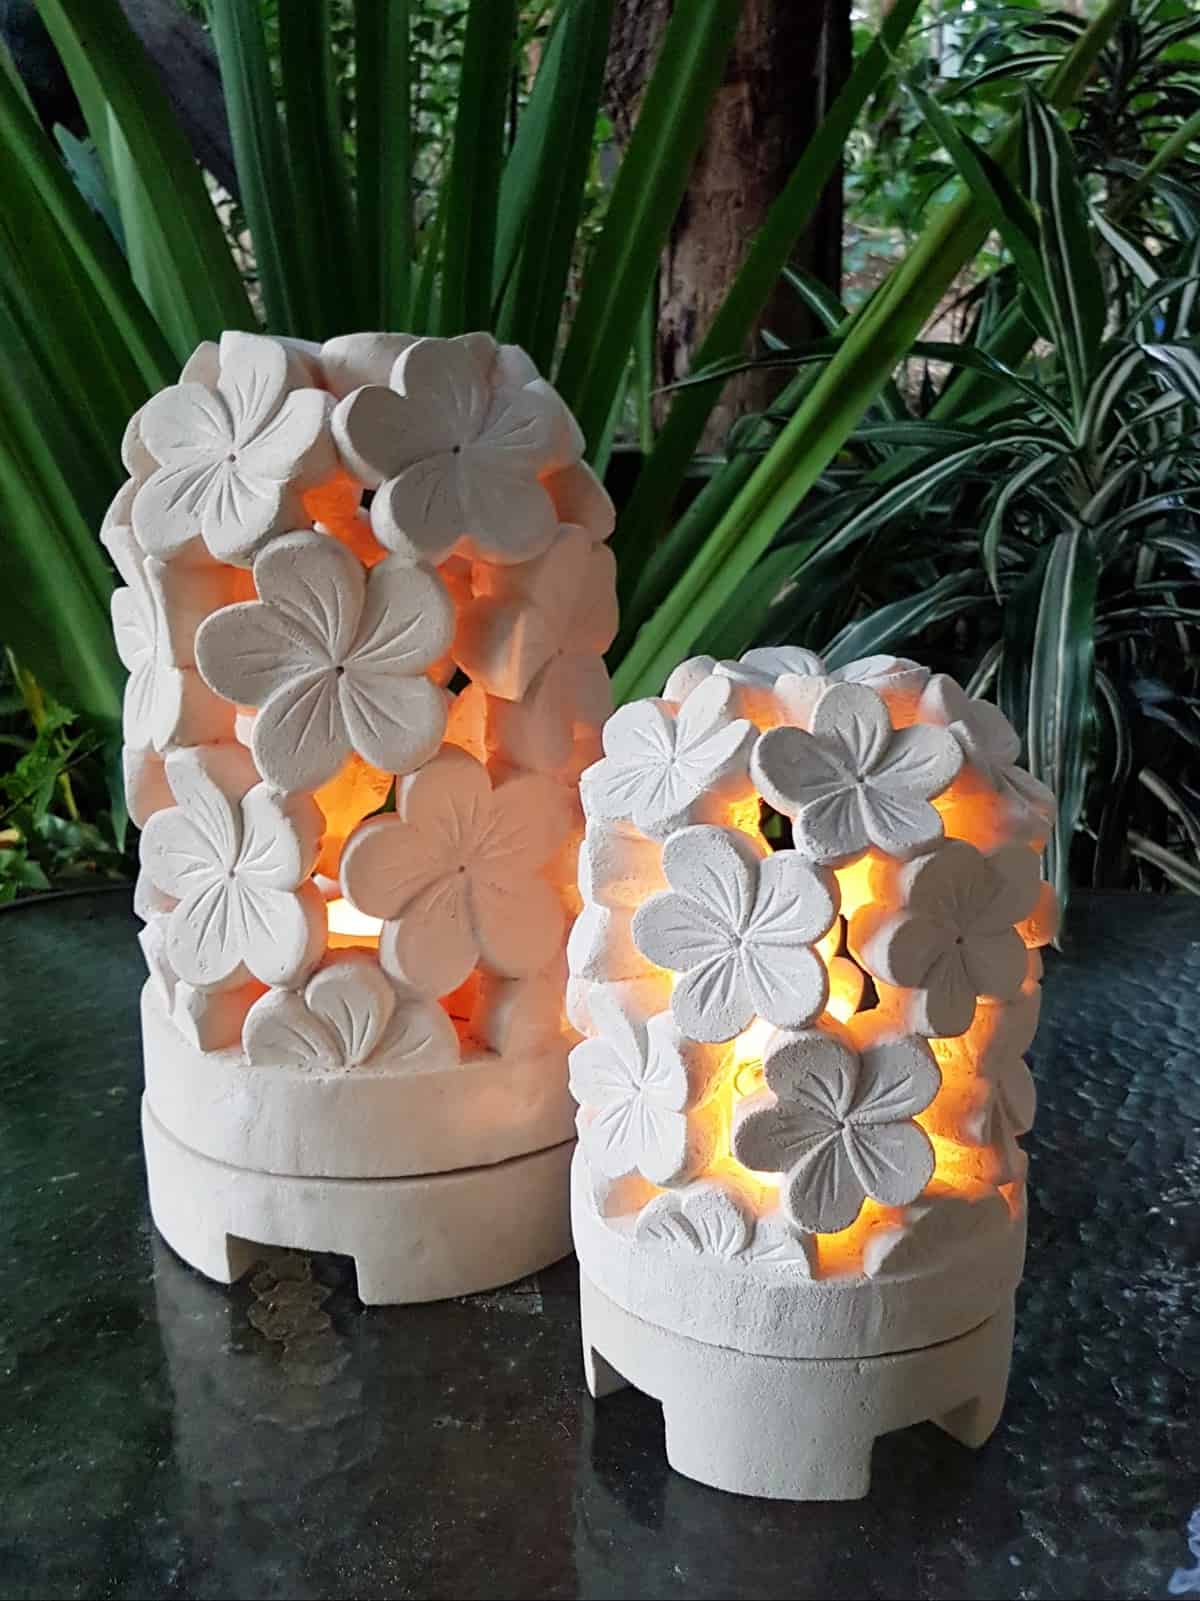 limestone lanterns - Frangipani - Balinese for interior and outdoor design. Add power through a hole in the bottom or add a candle.